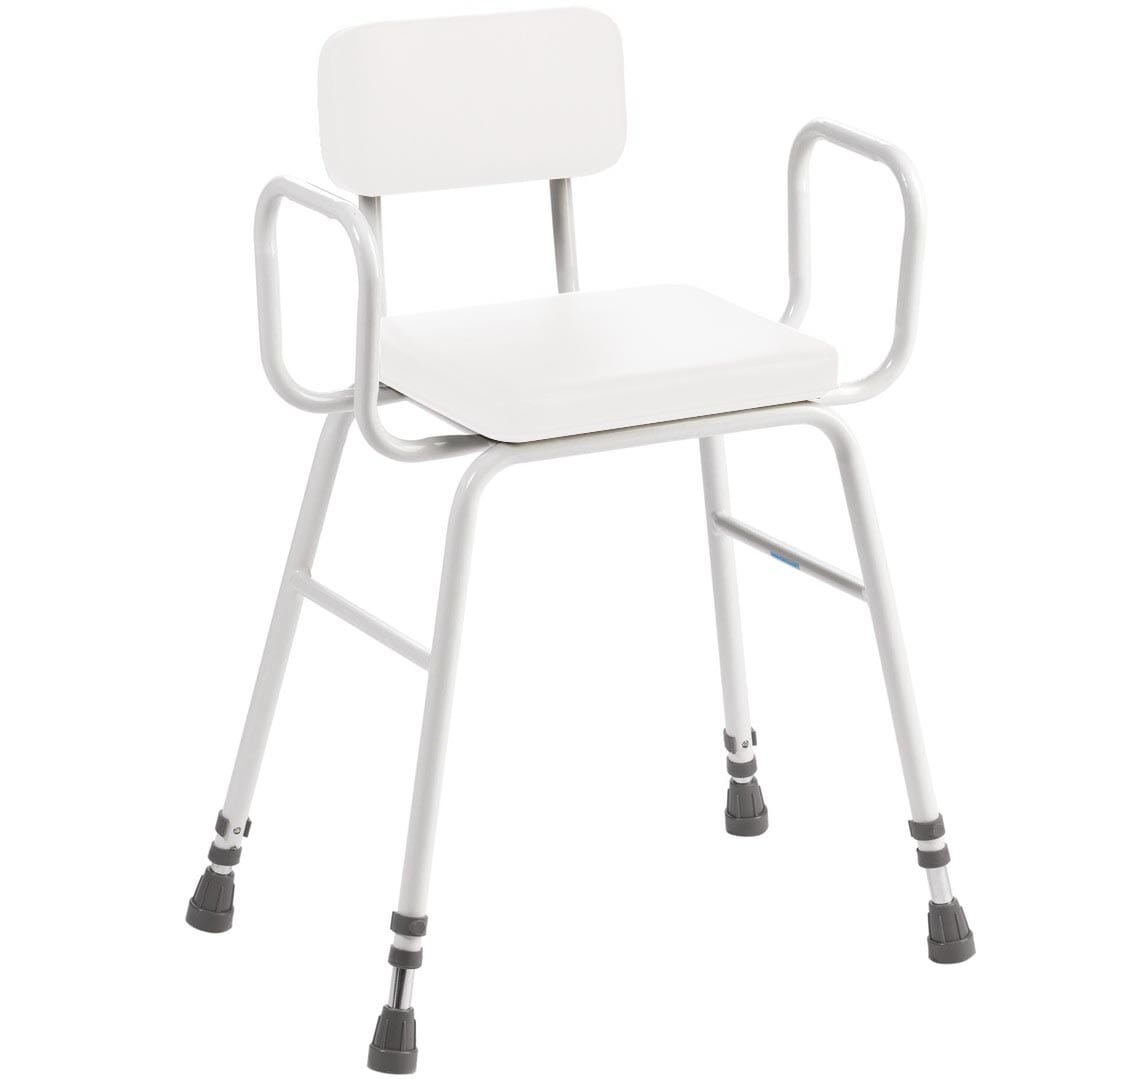 View Perching Stool in White Perching Stool Foam SeatBack Steel Arms Adj Height White information